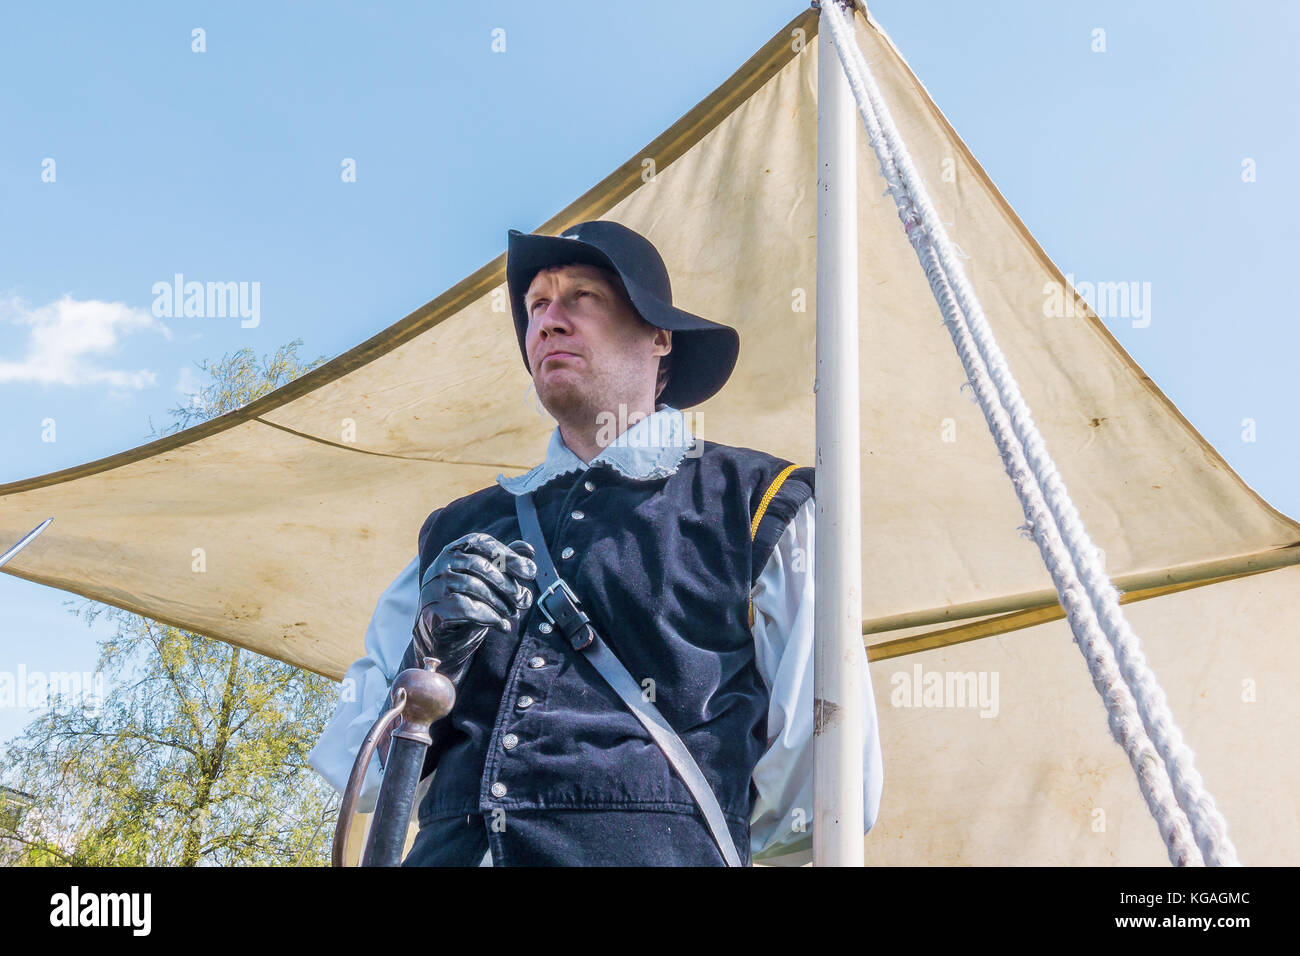 Swedish soldier from the 1600s standing in front of a tent, Denmark, May 21, 2017 Stock Photo